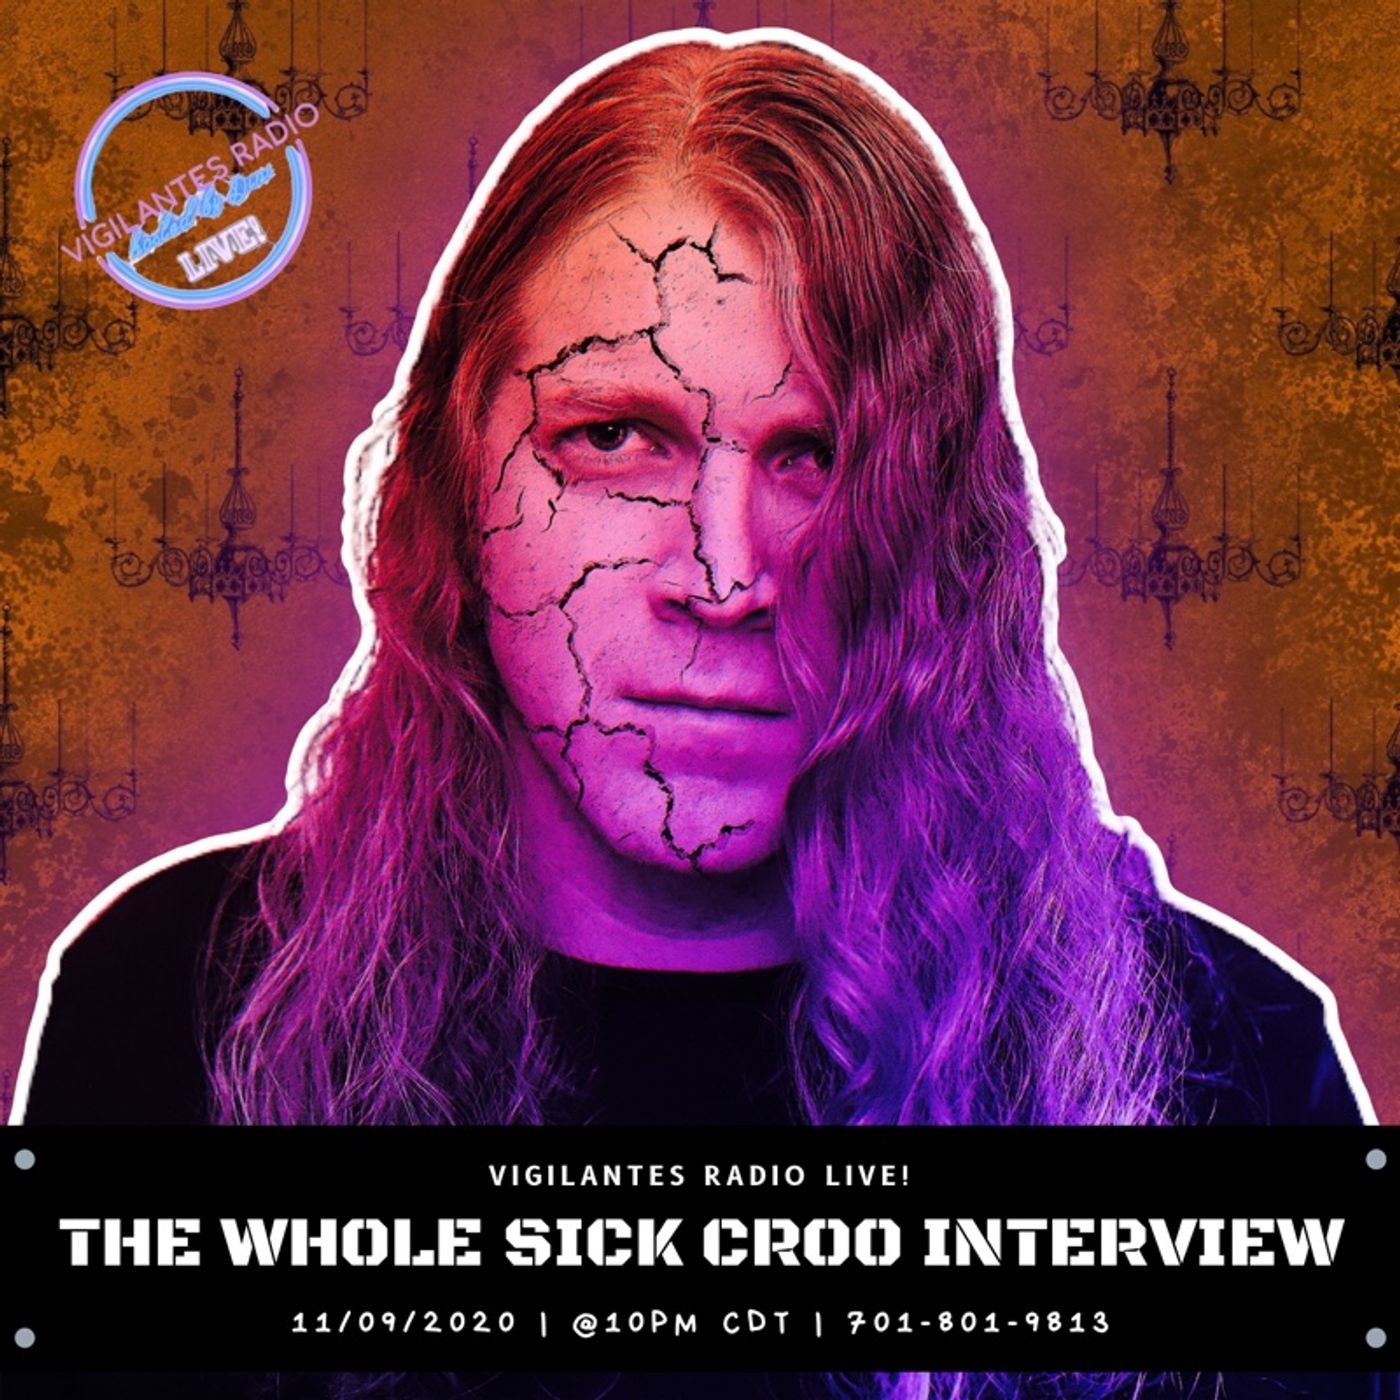 The Whole Sick Croo Interview. Image